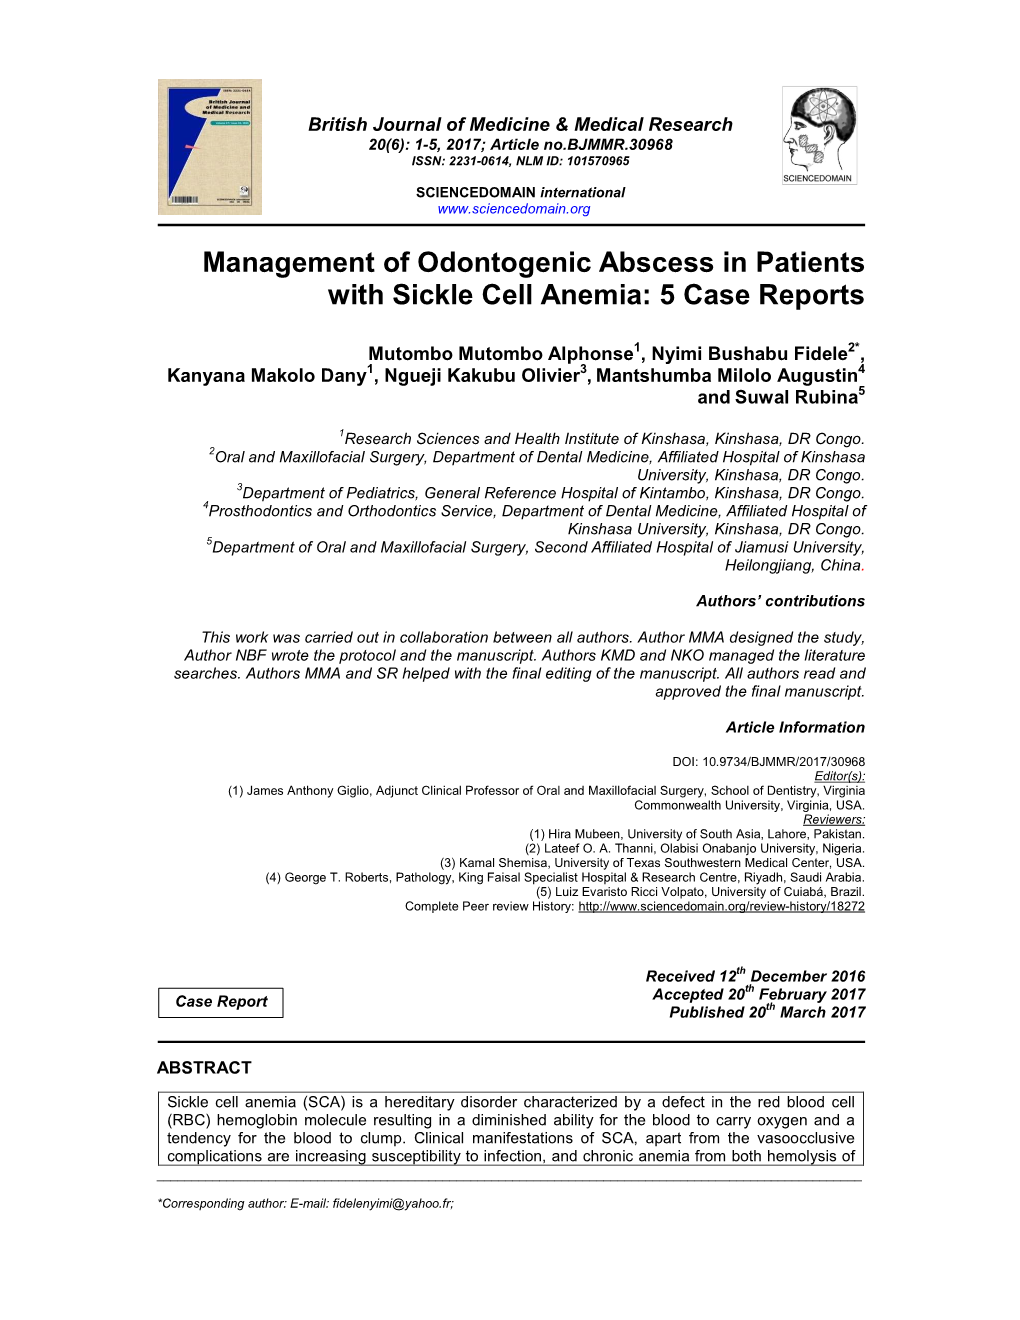 Management of Odontogenic Abscess in Patients with Sickle Cell Anemia: 5 Case Reports